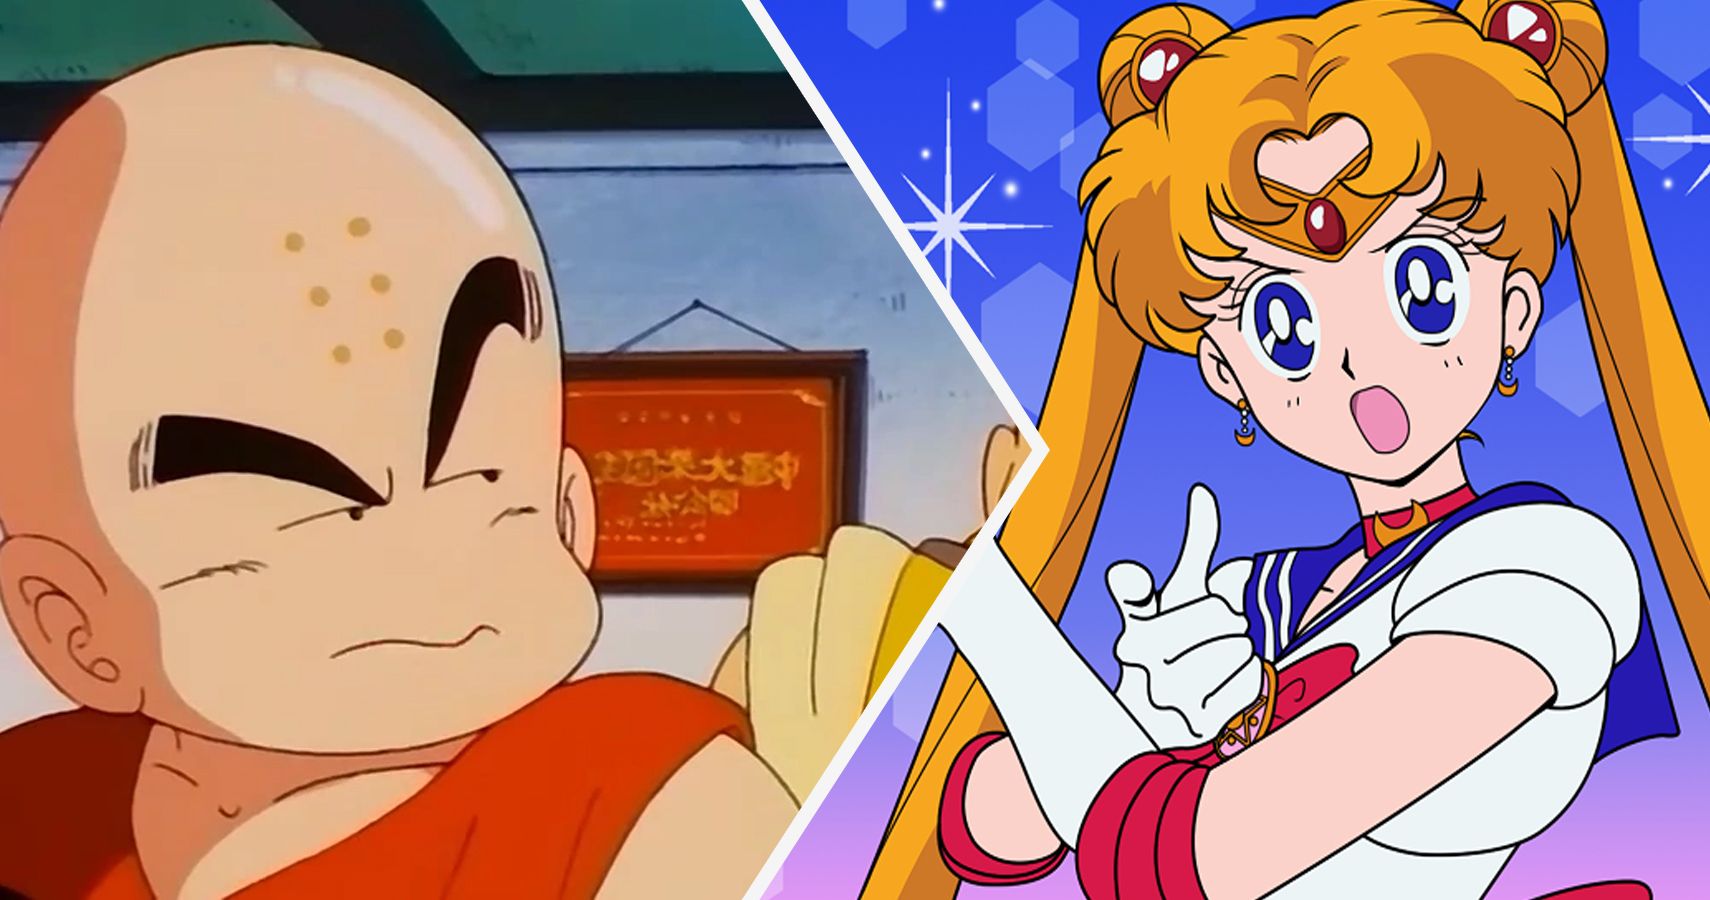 15 Classic Anime Shows That Are Overrated (And 15 Worth A Second Look)